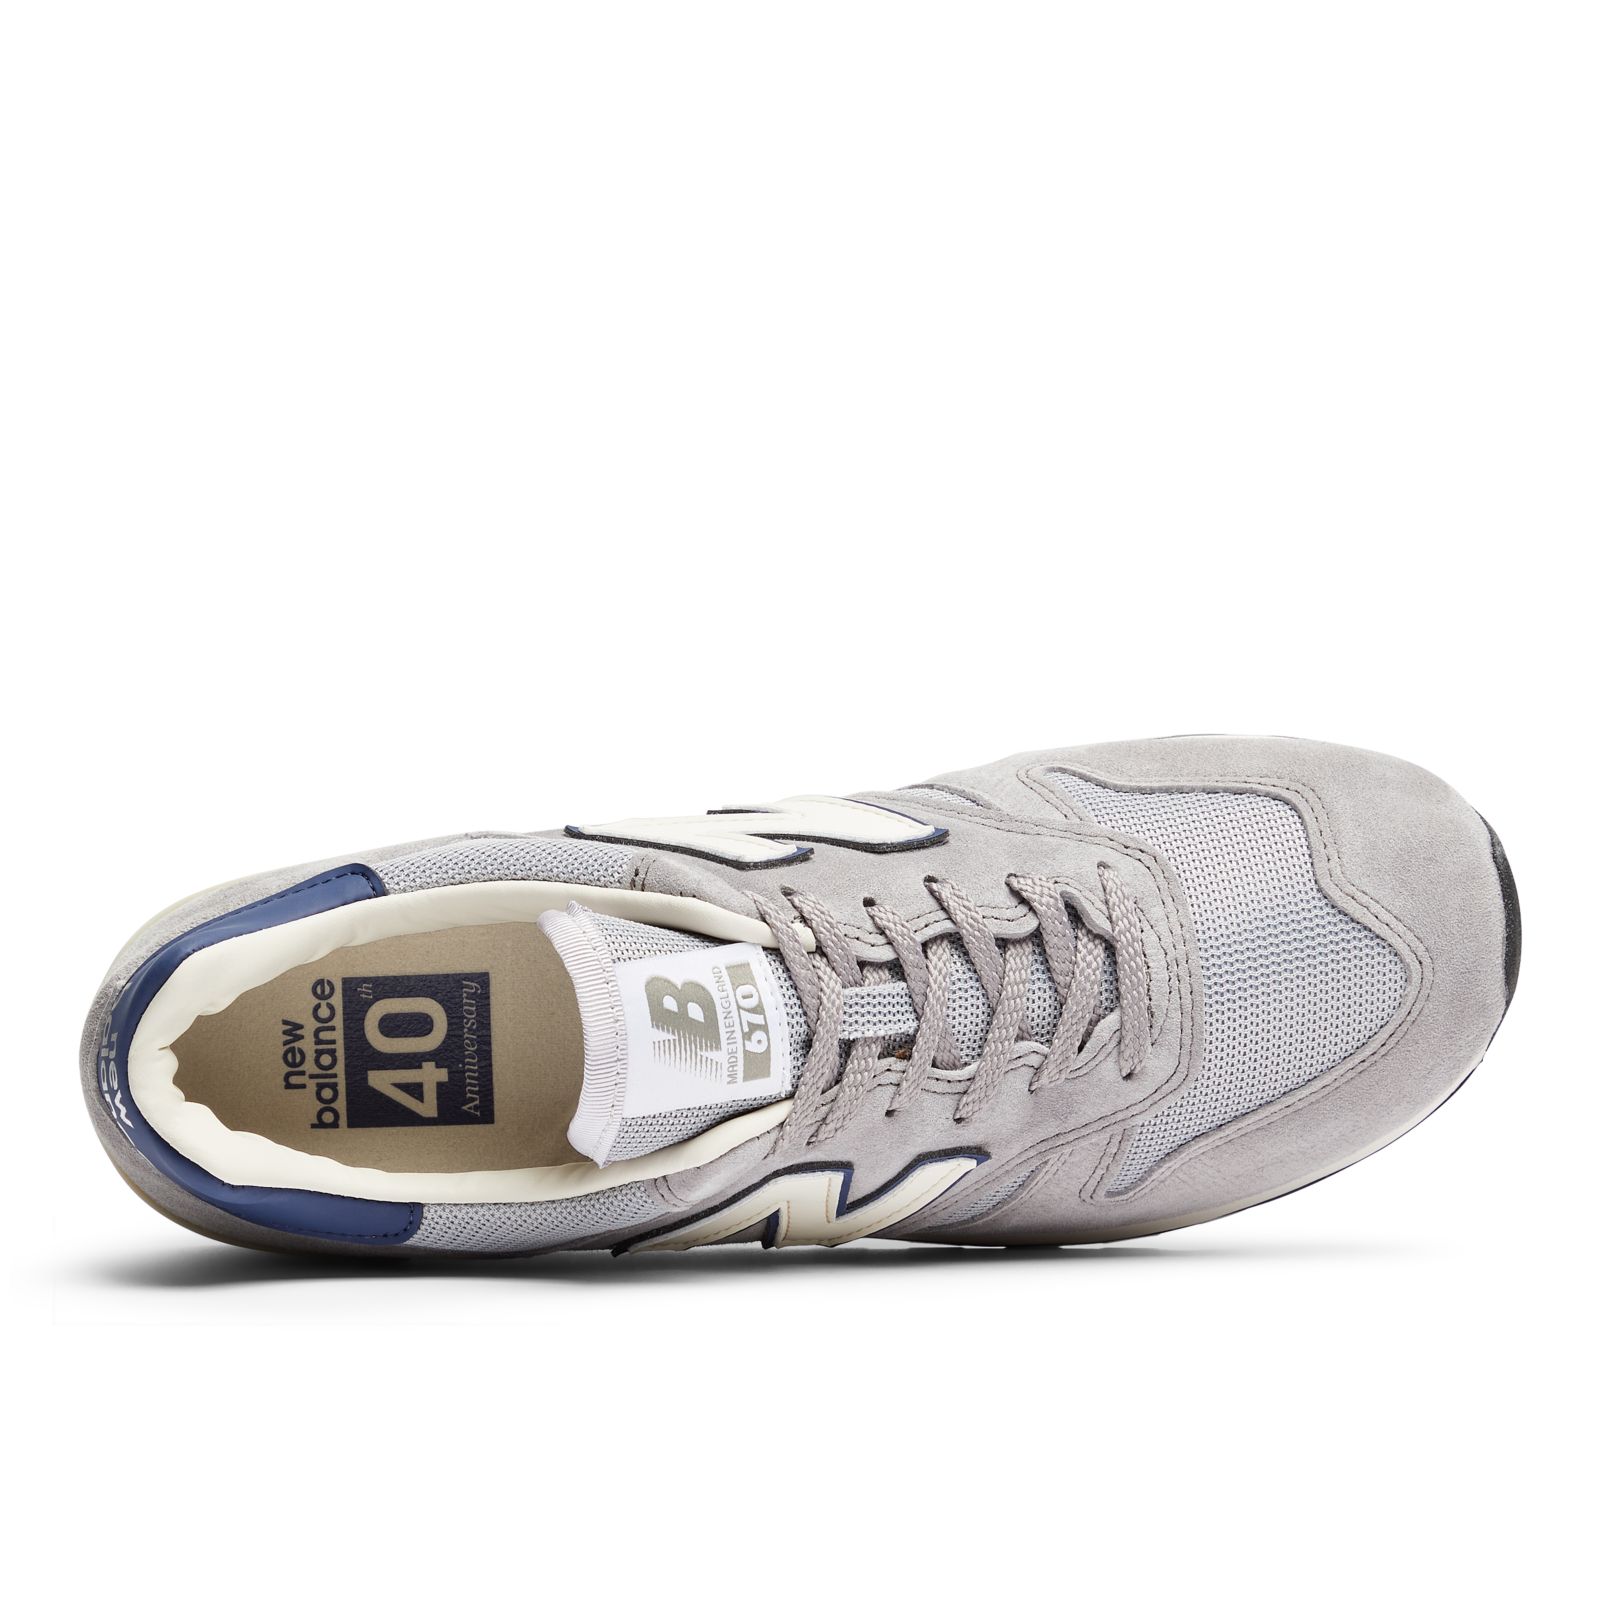 Men's MADE in UK 670 Shoes - New Balance